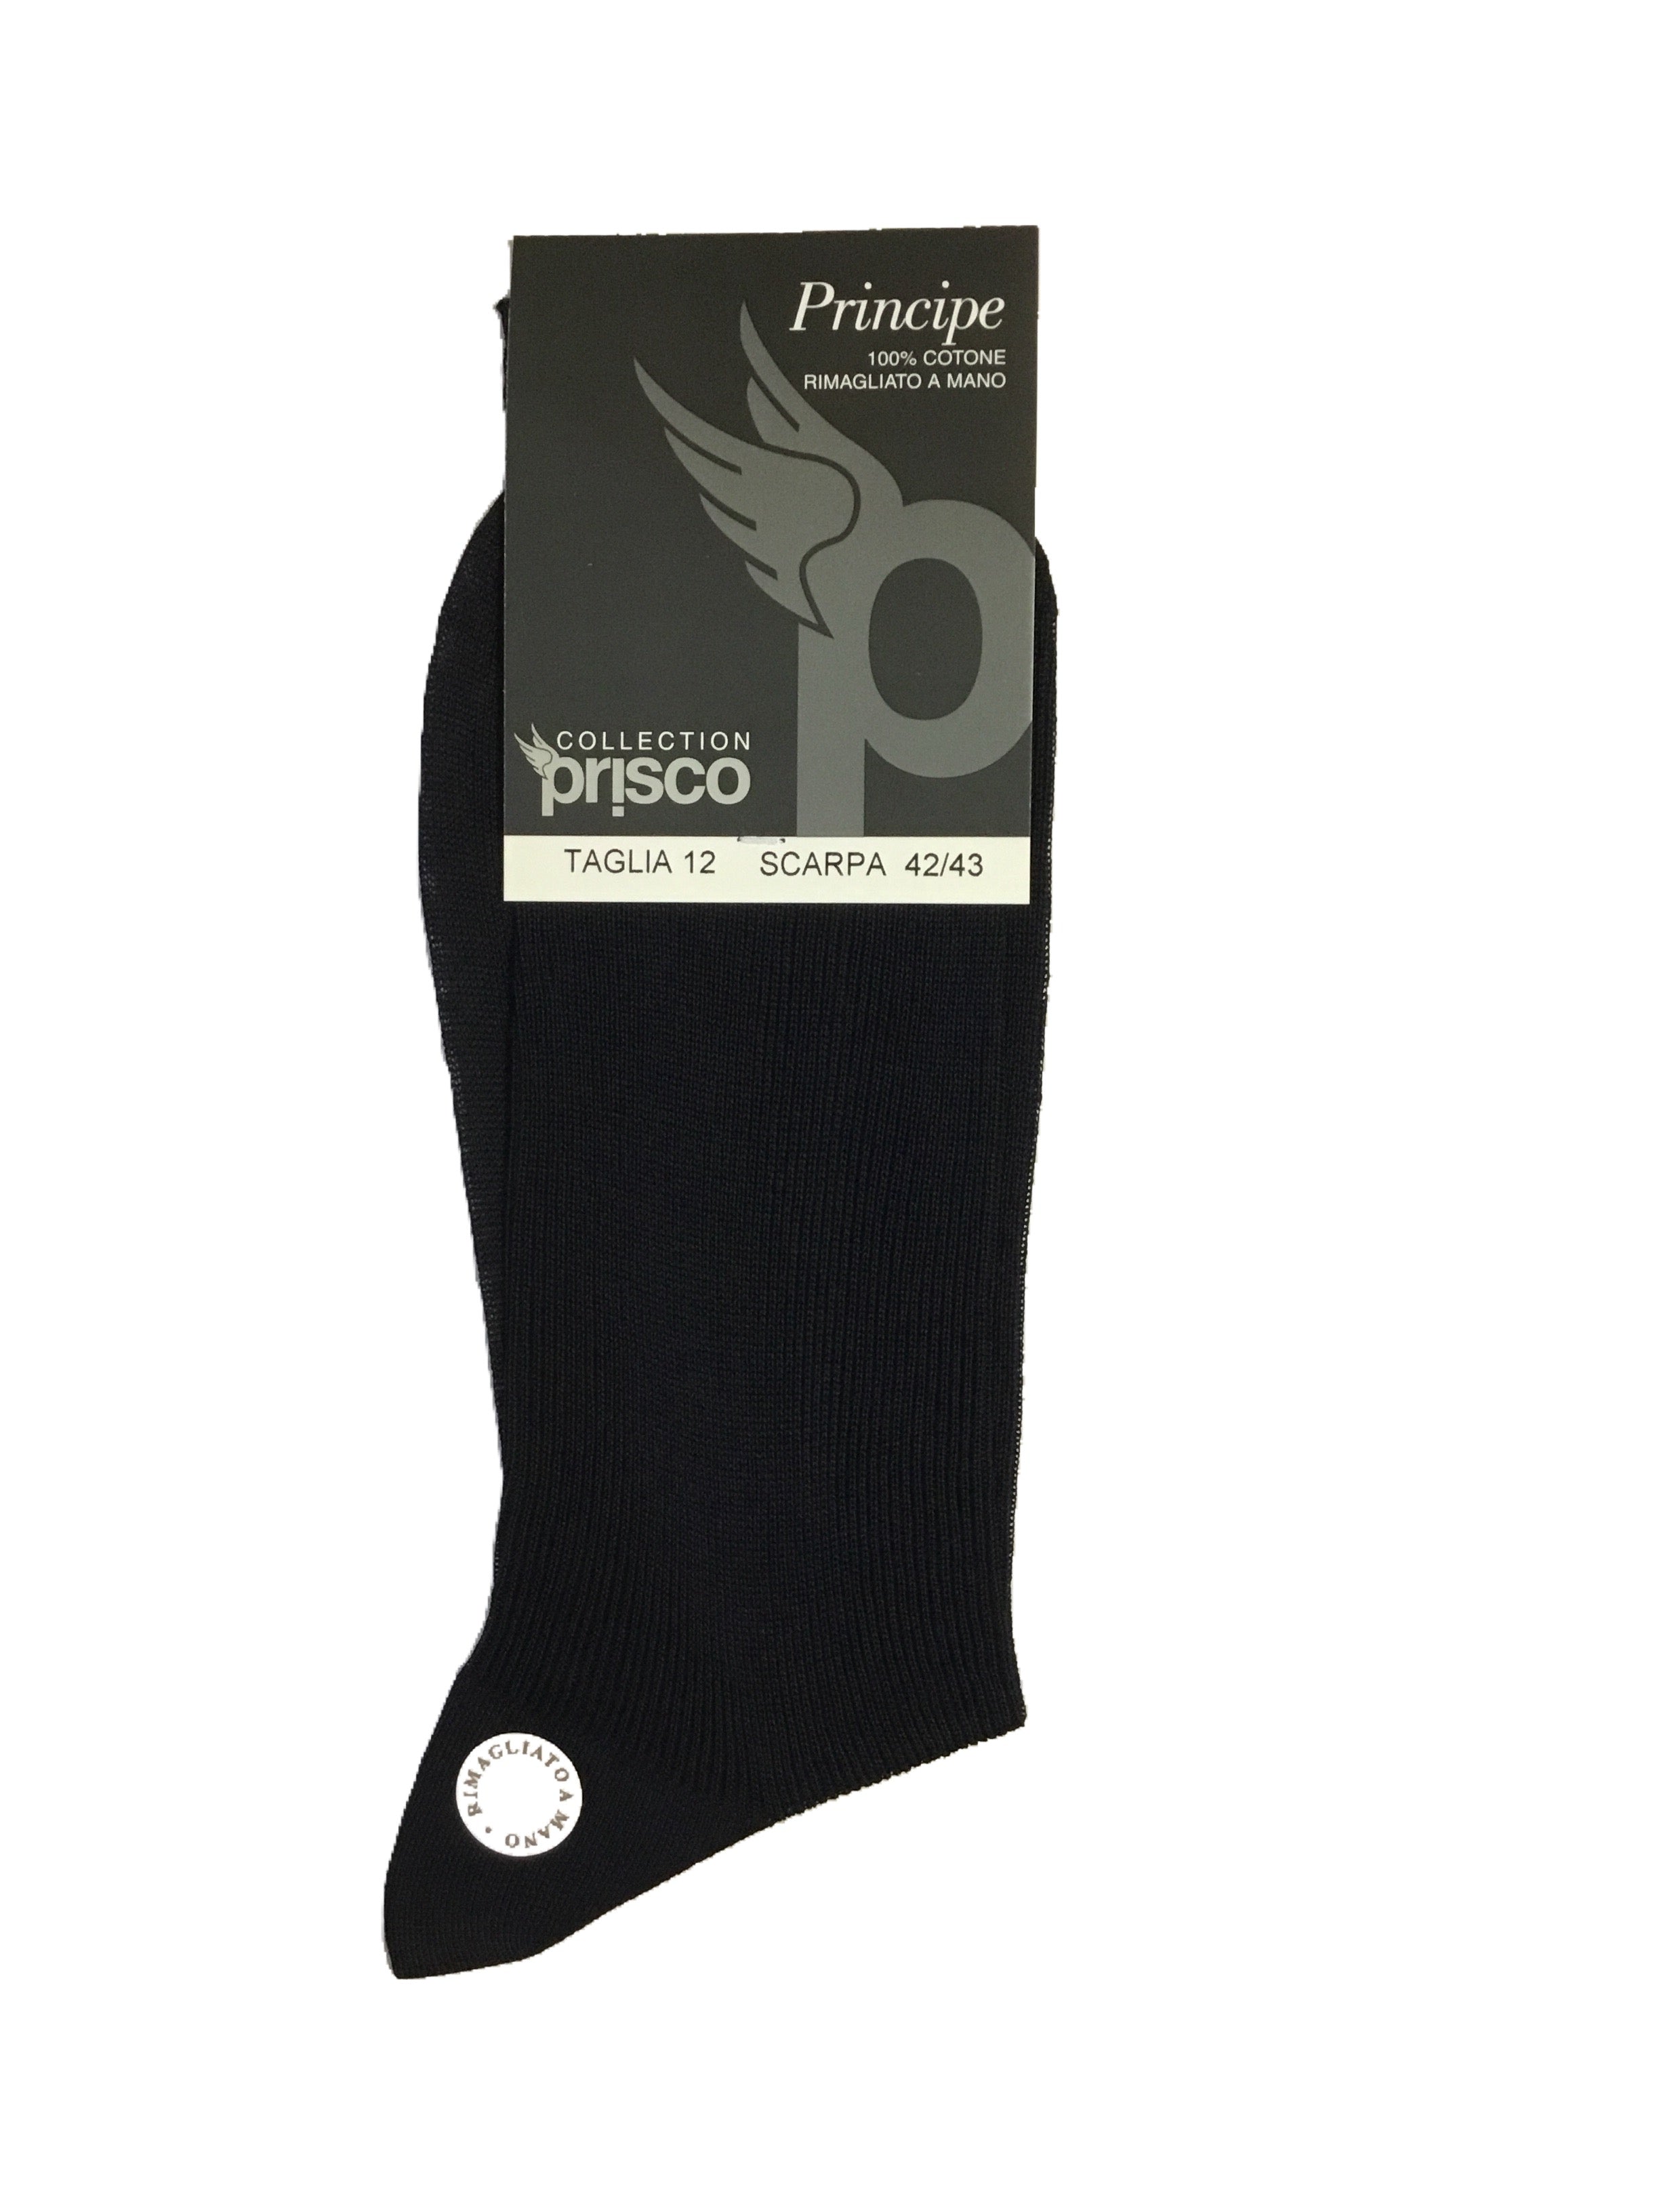 Long Double Strength Sock in Lisle for Men | Plain Color | Pack of 6 Pairs | Long Shaved Prince